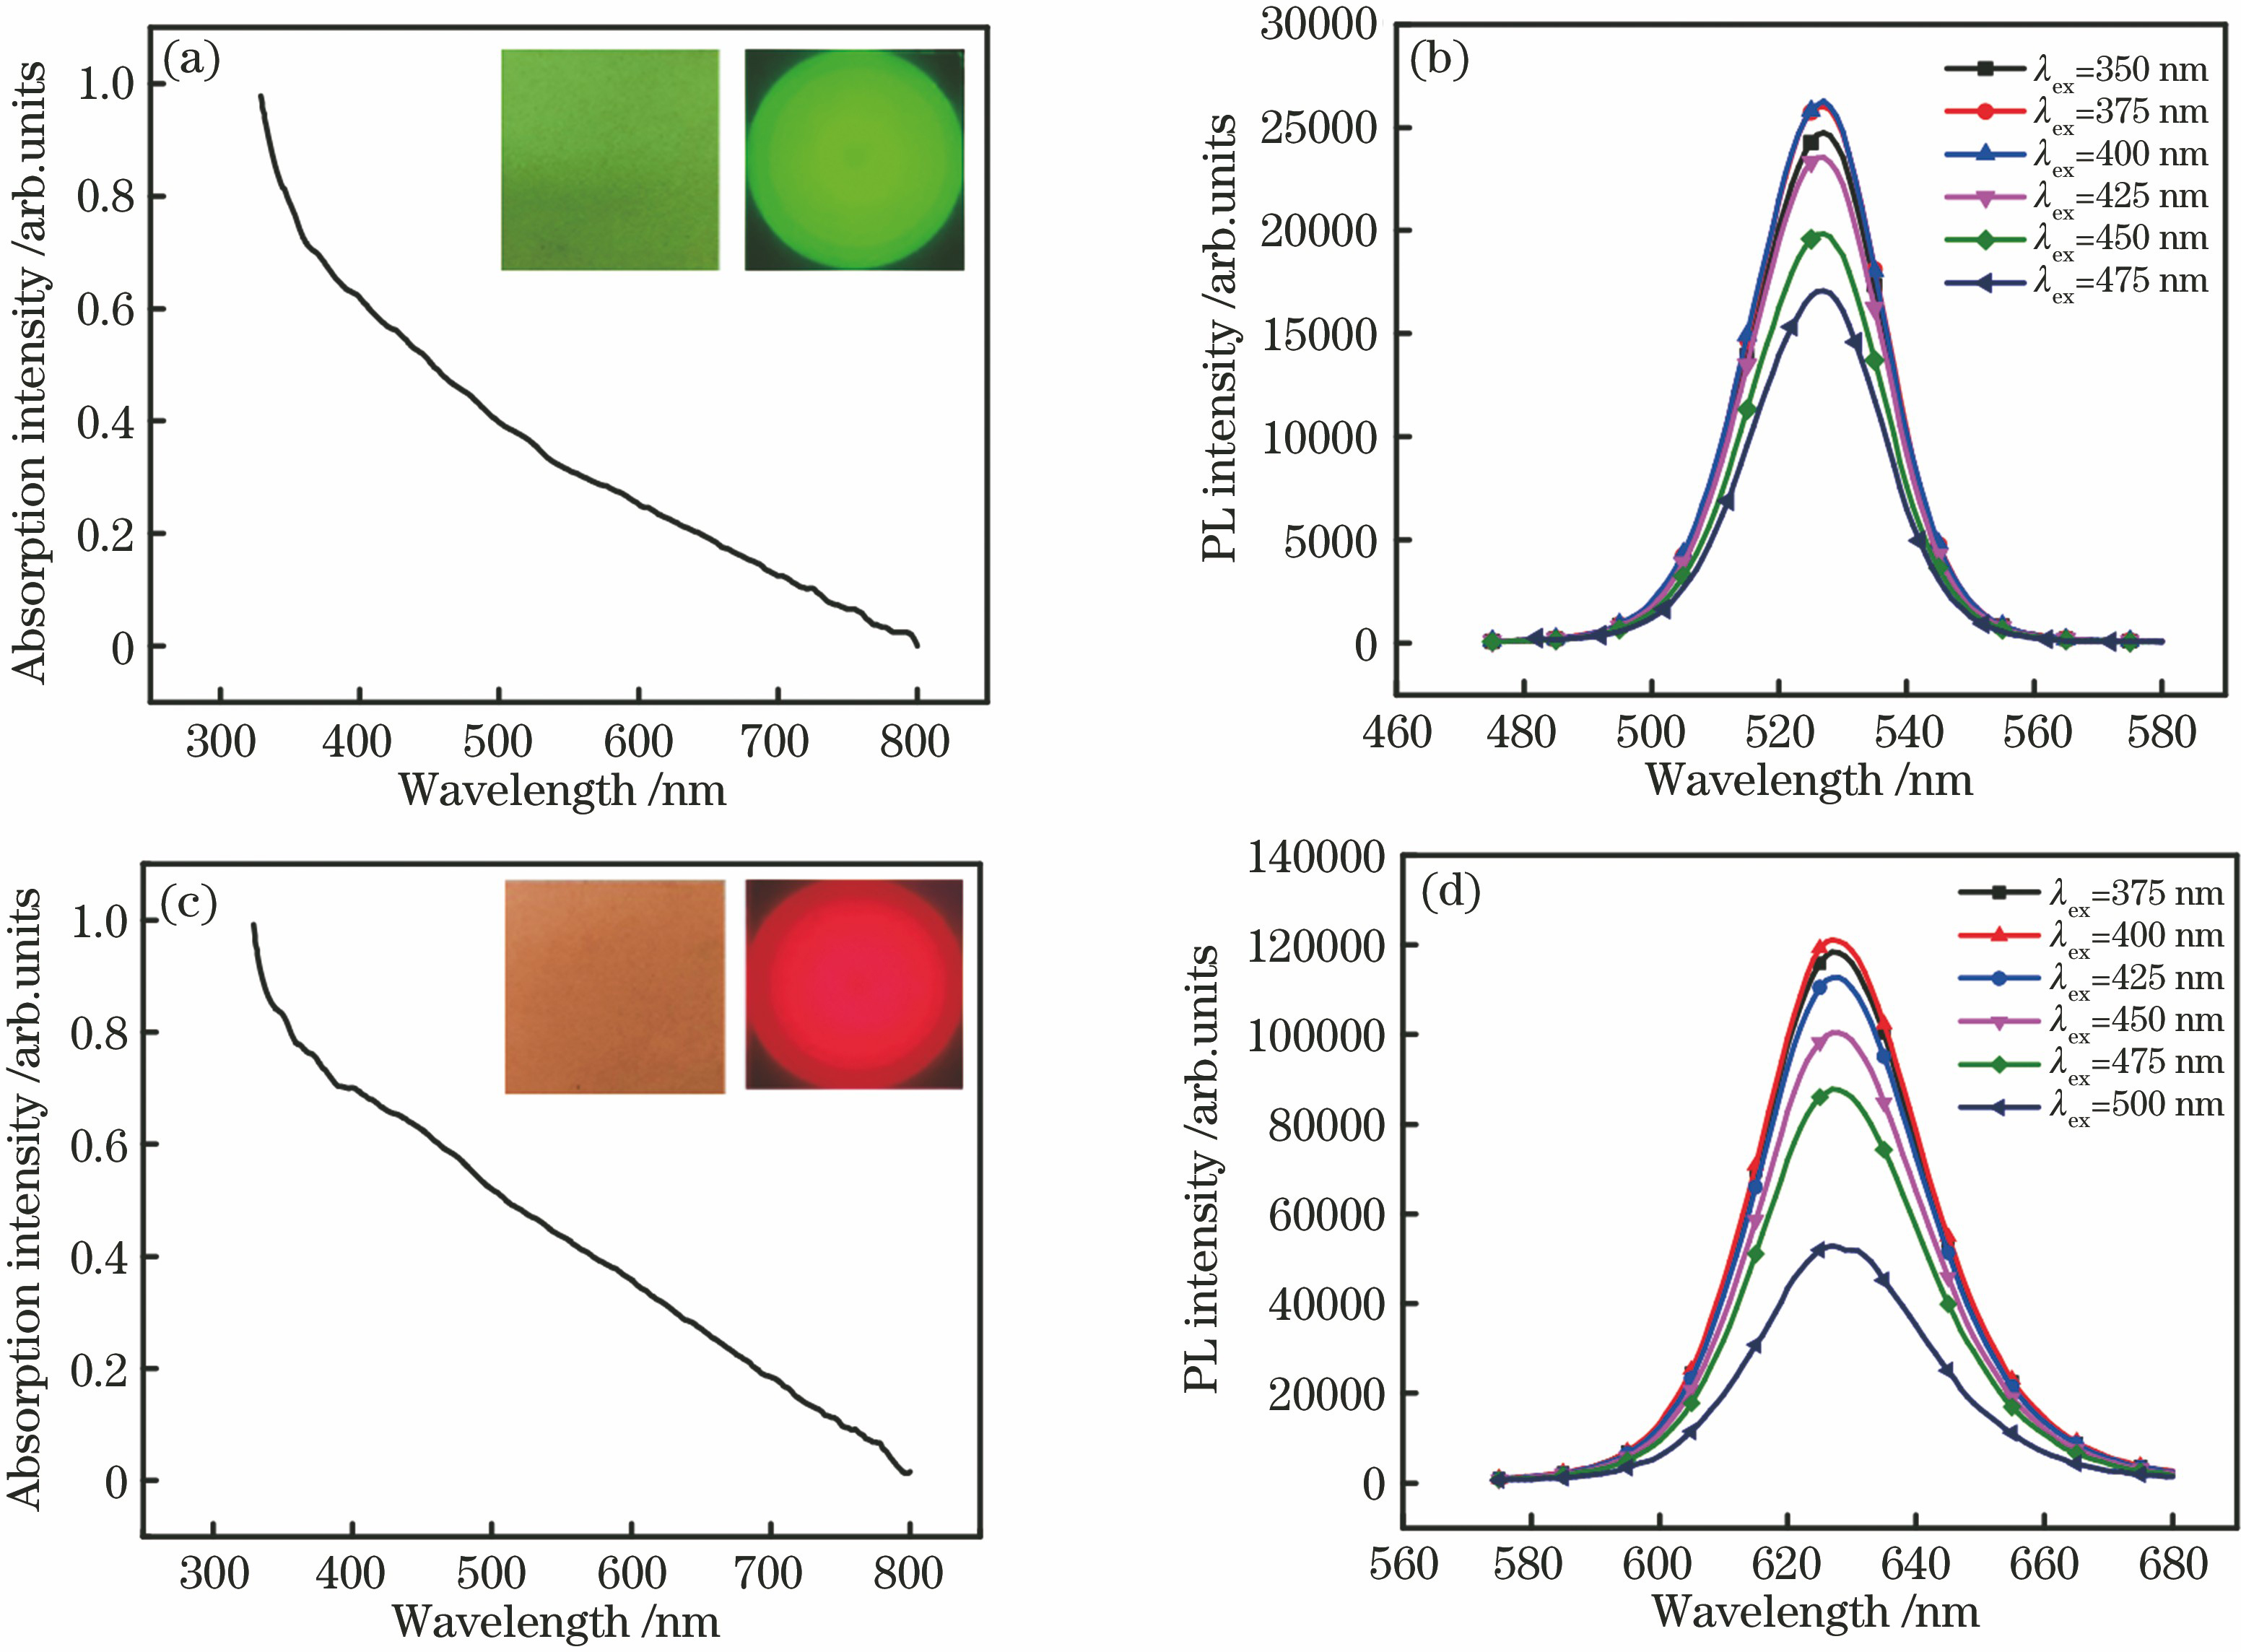 Absorption and PL spectra of quantum dot film. (a) Absorption spectrum of green quantum dot film, insets are photographs of green quantum dot film in natural light and darkness; (b) PL spectra of green quantum dot film; (c) absorption spectrum of red quantum dot film, insets are photographs of red quantum dot film in natural light and darkness; (d) PL spectra of red quantum dot film